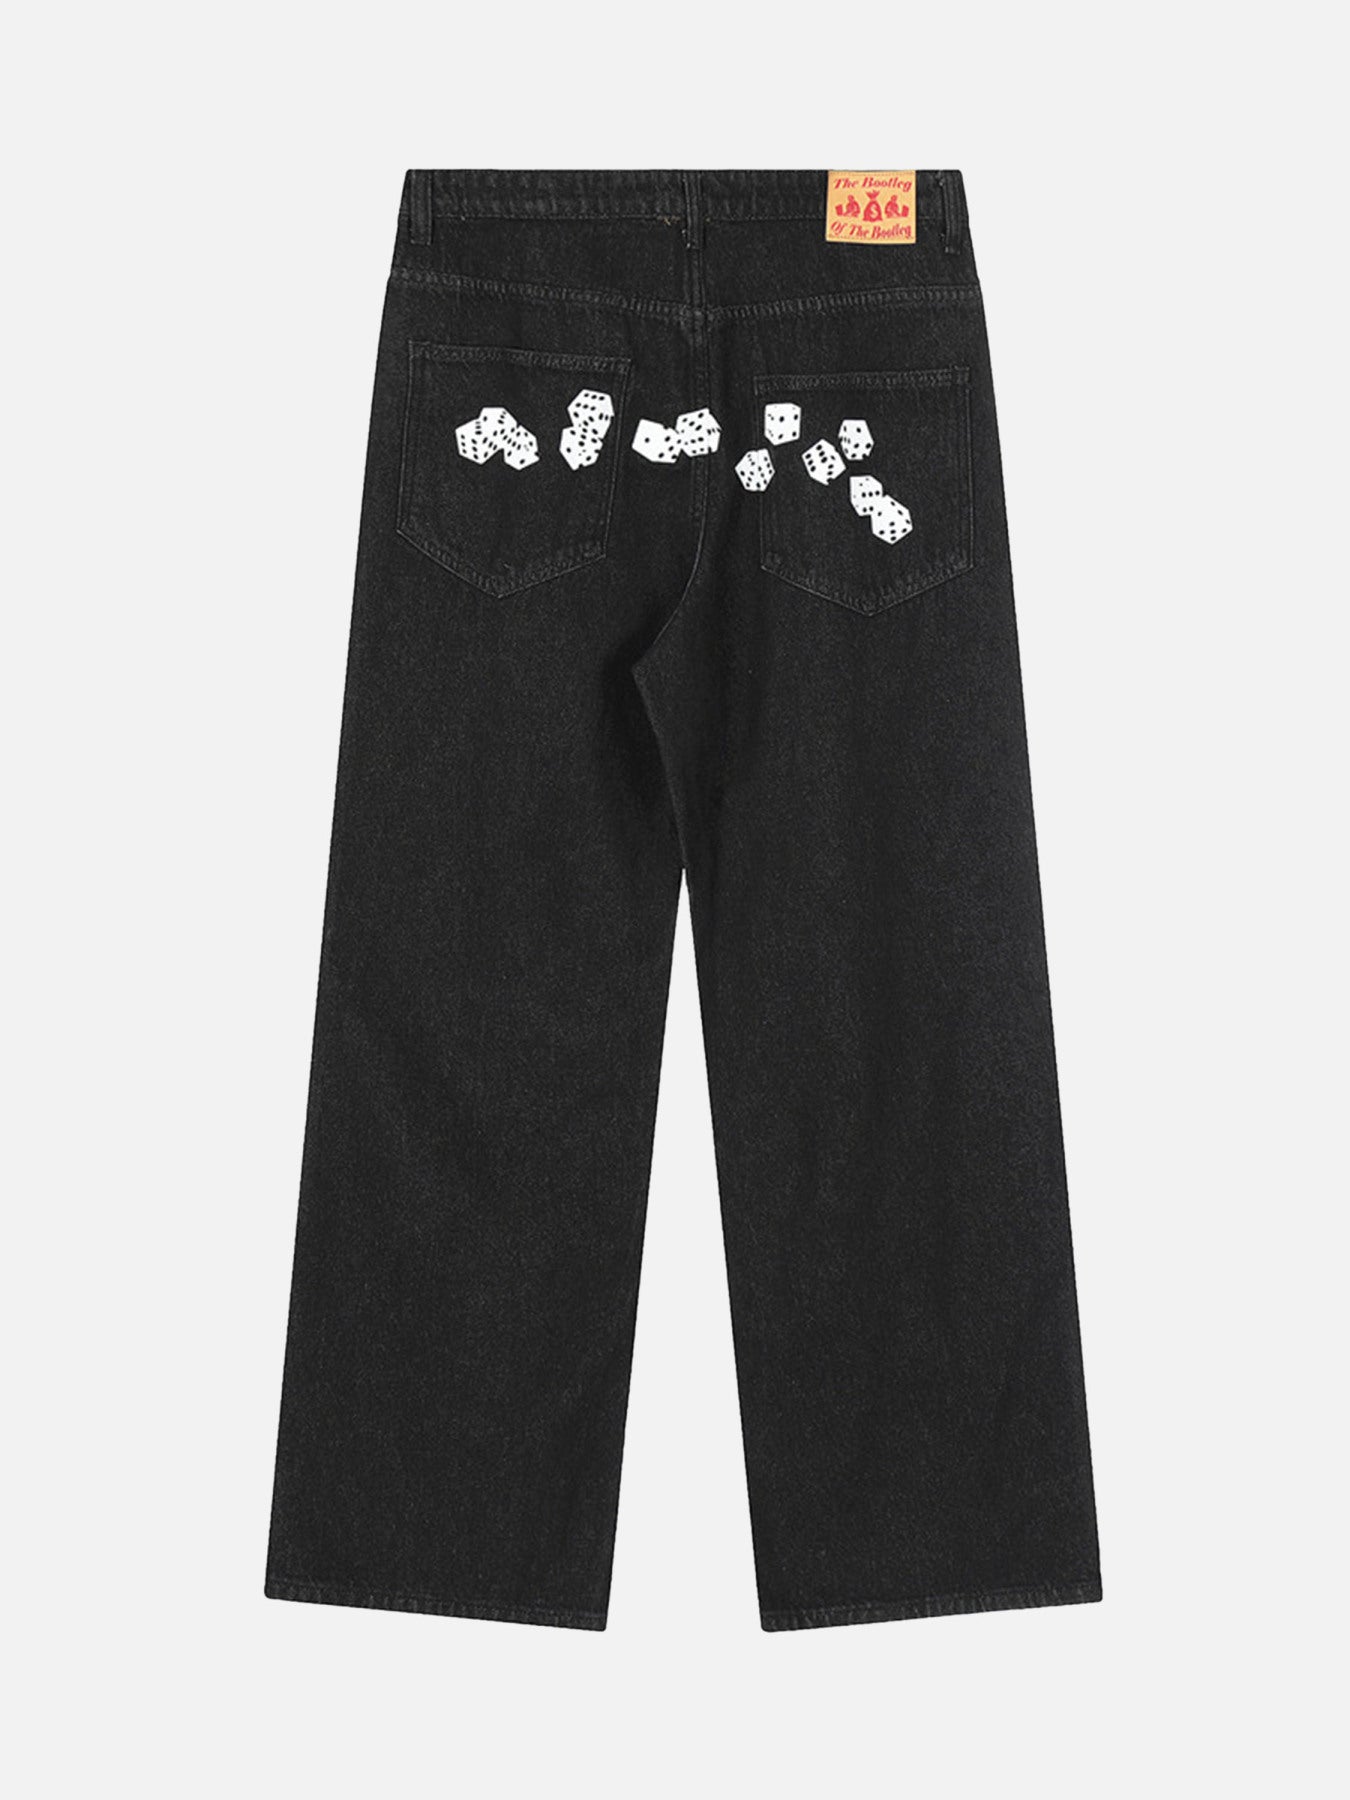 The Supermade Vintage Dice Print Jeans